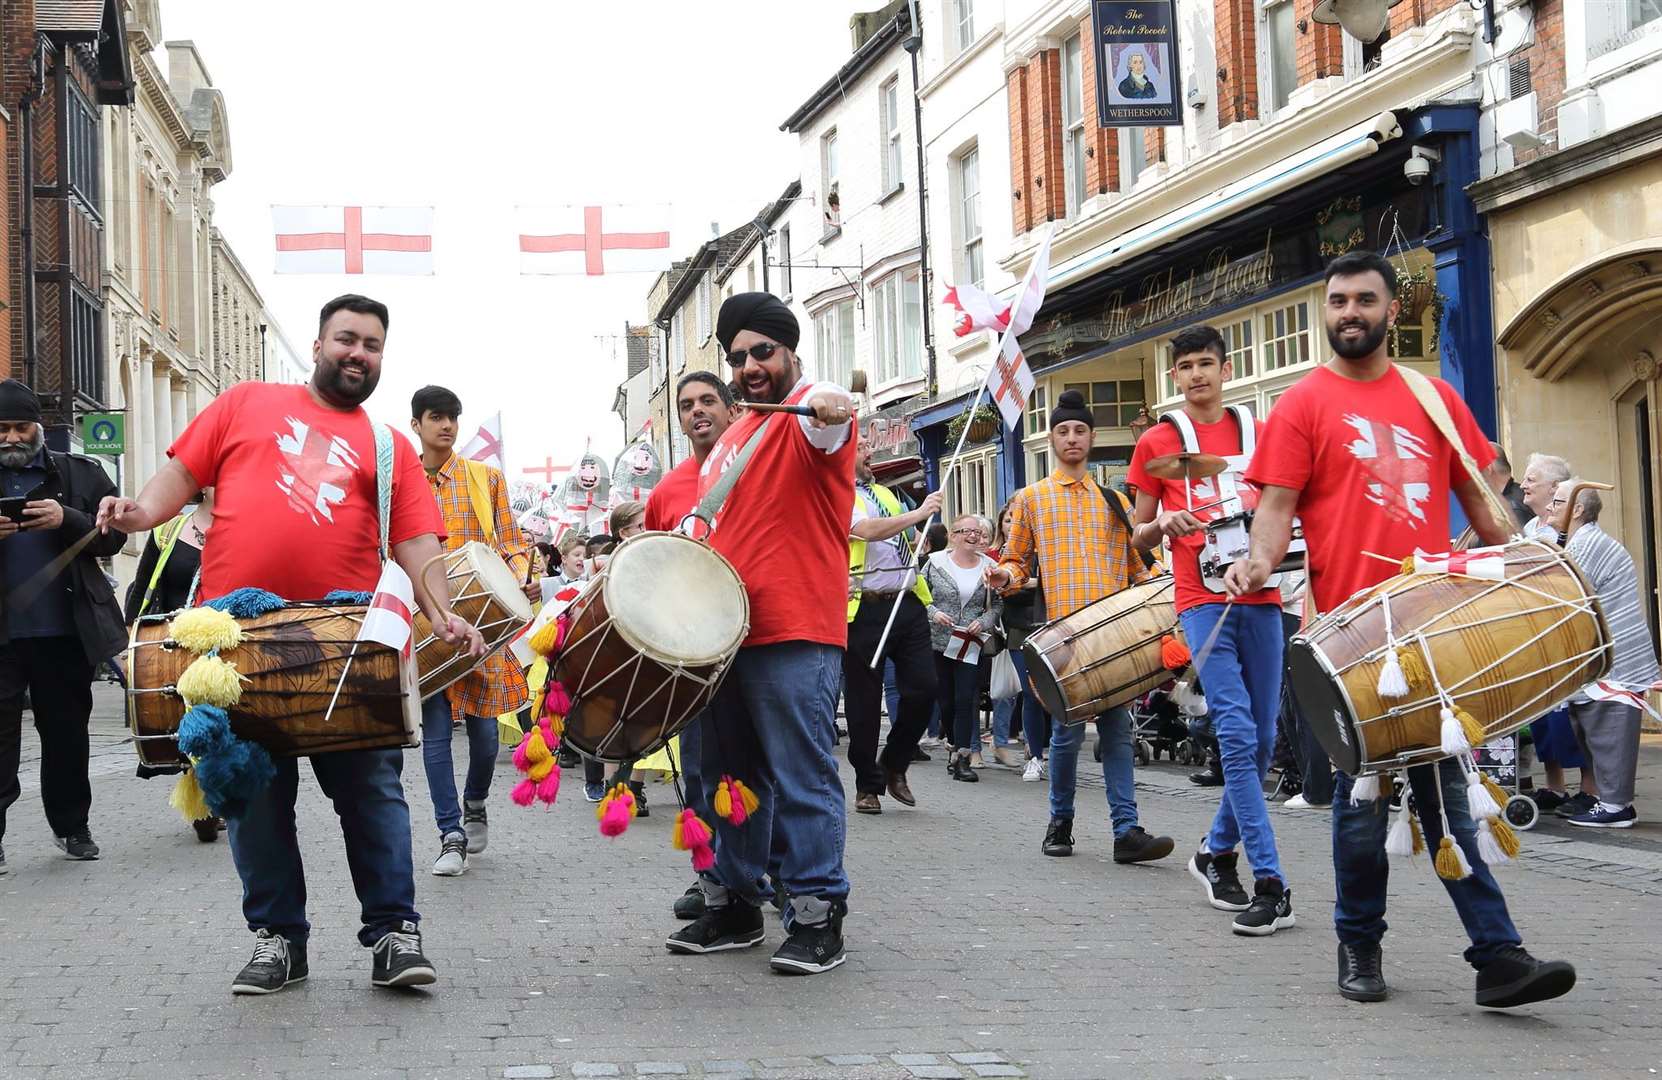 Fusion dhol drummers will be part of the parades